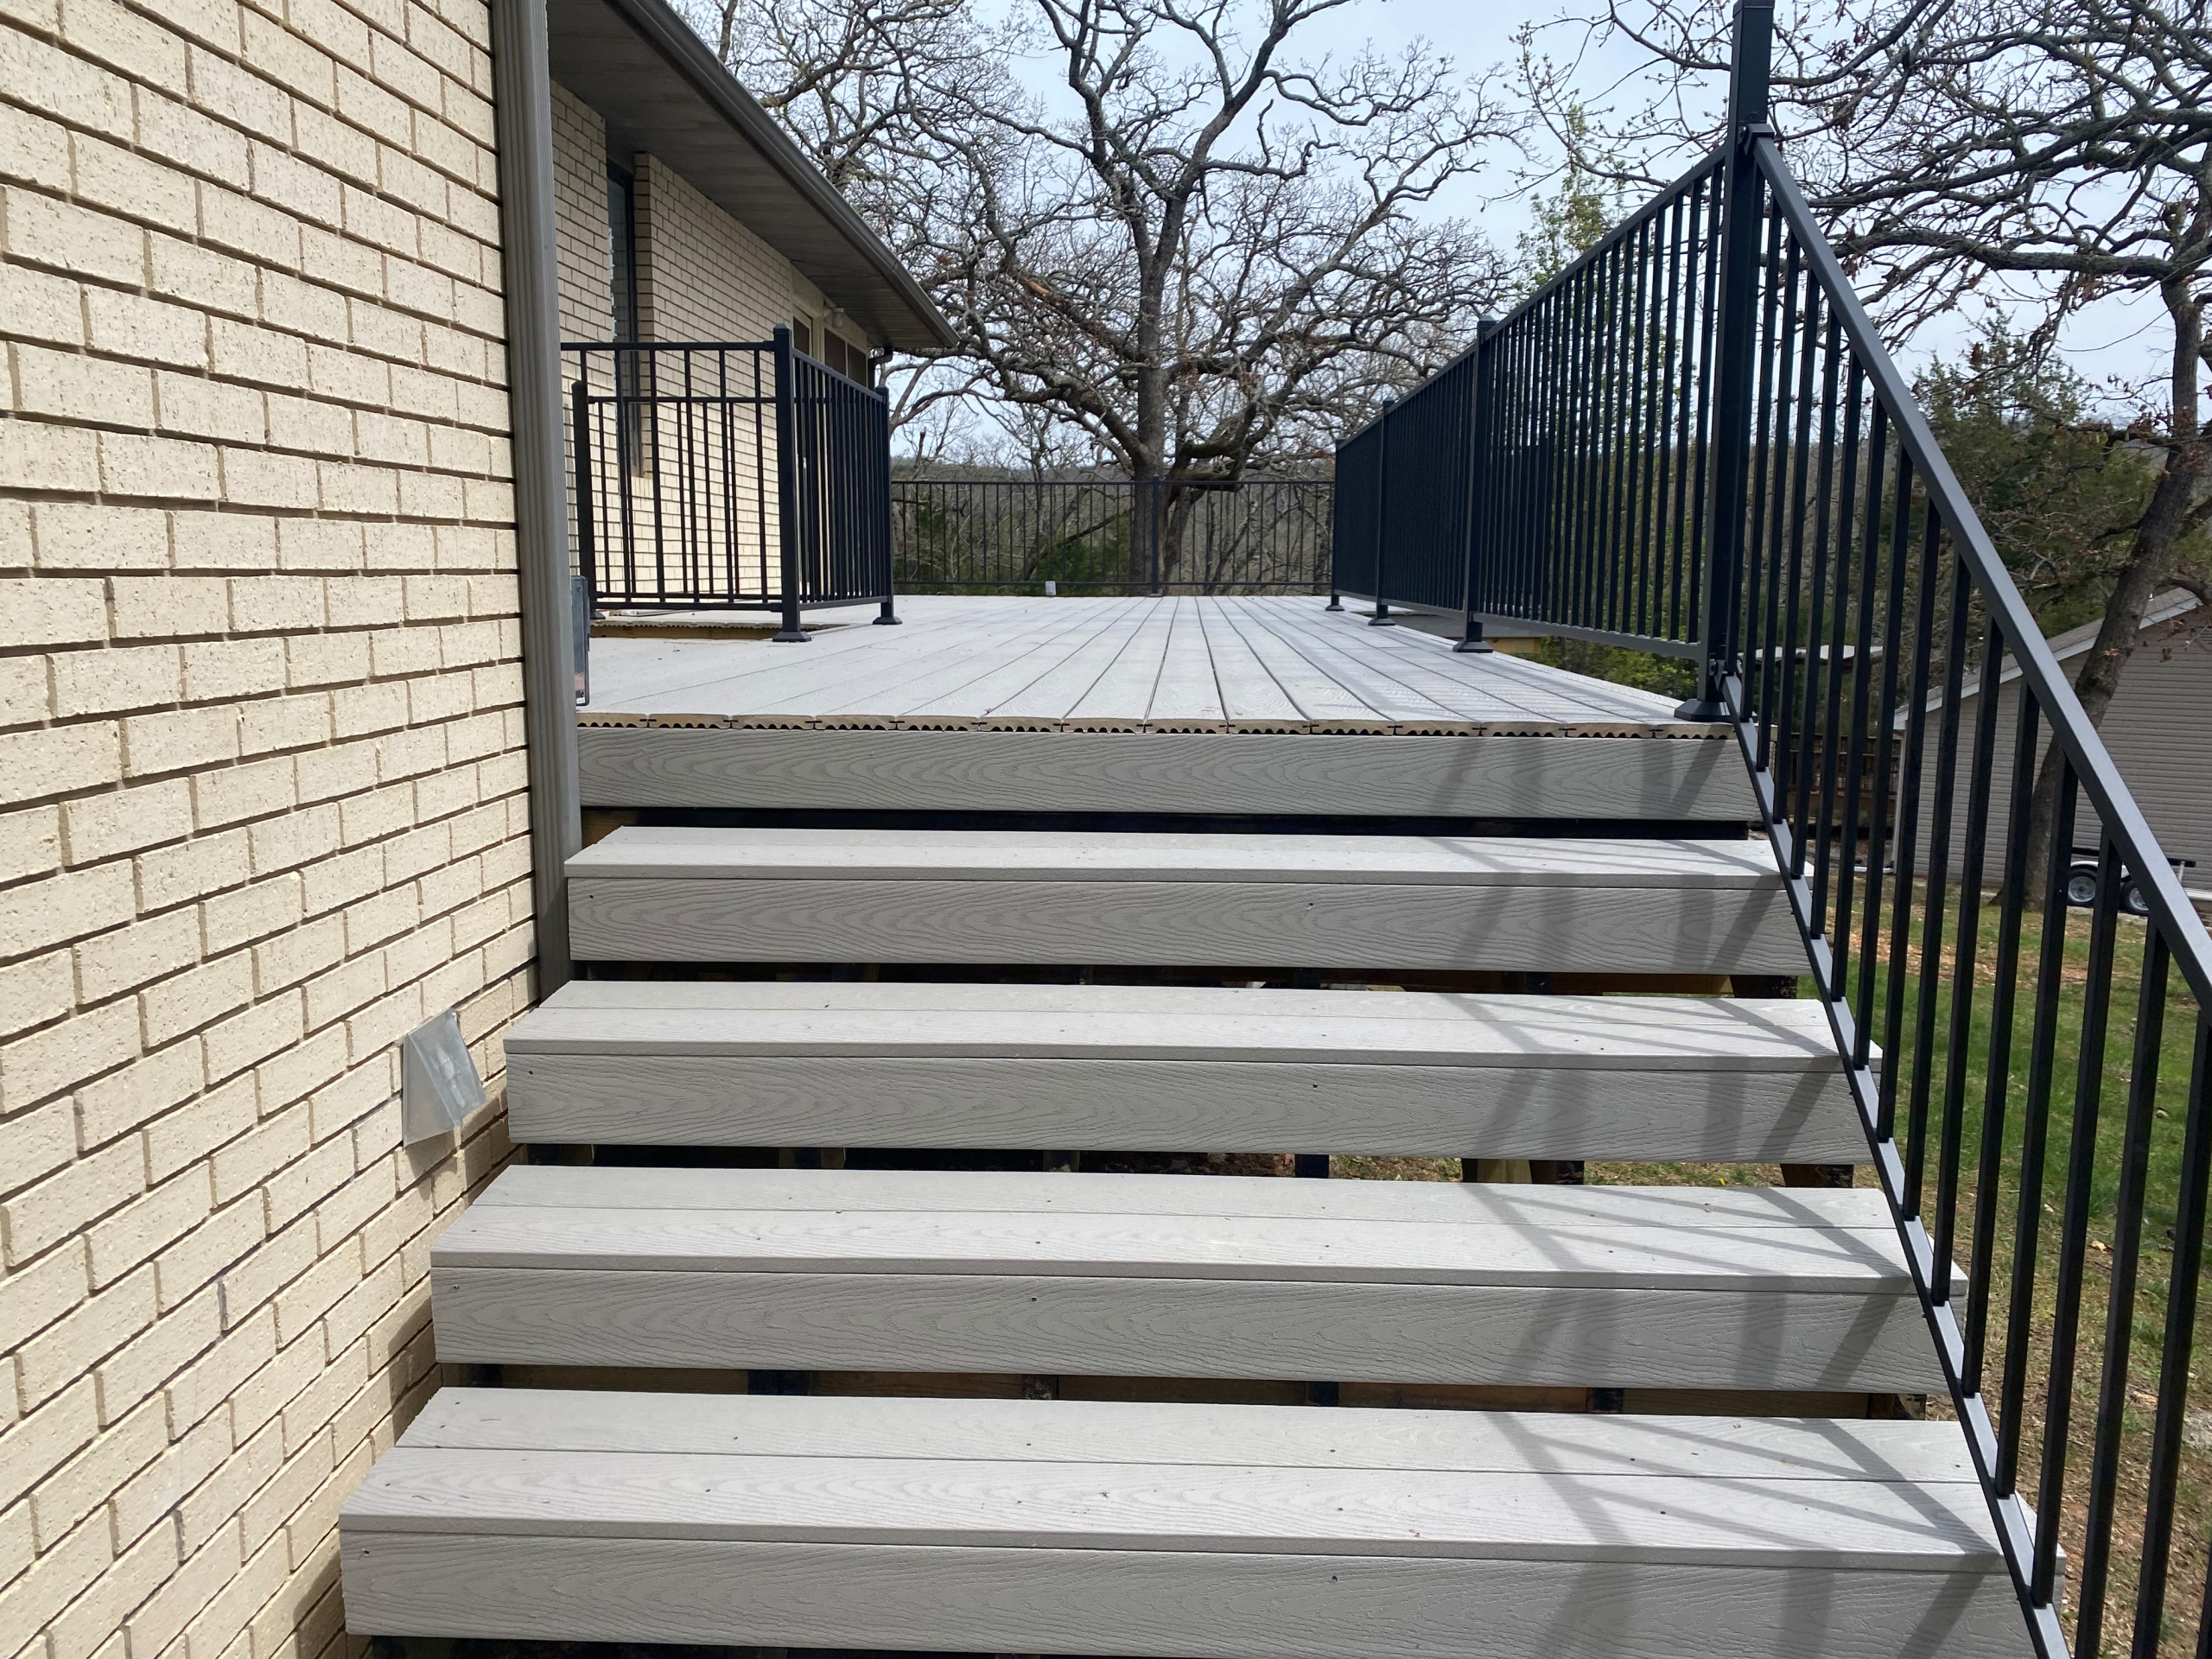 Stairs completed on new deck